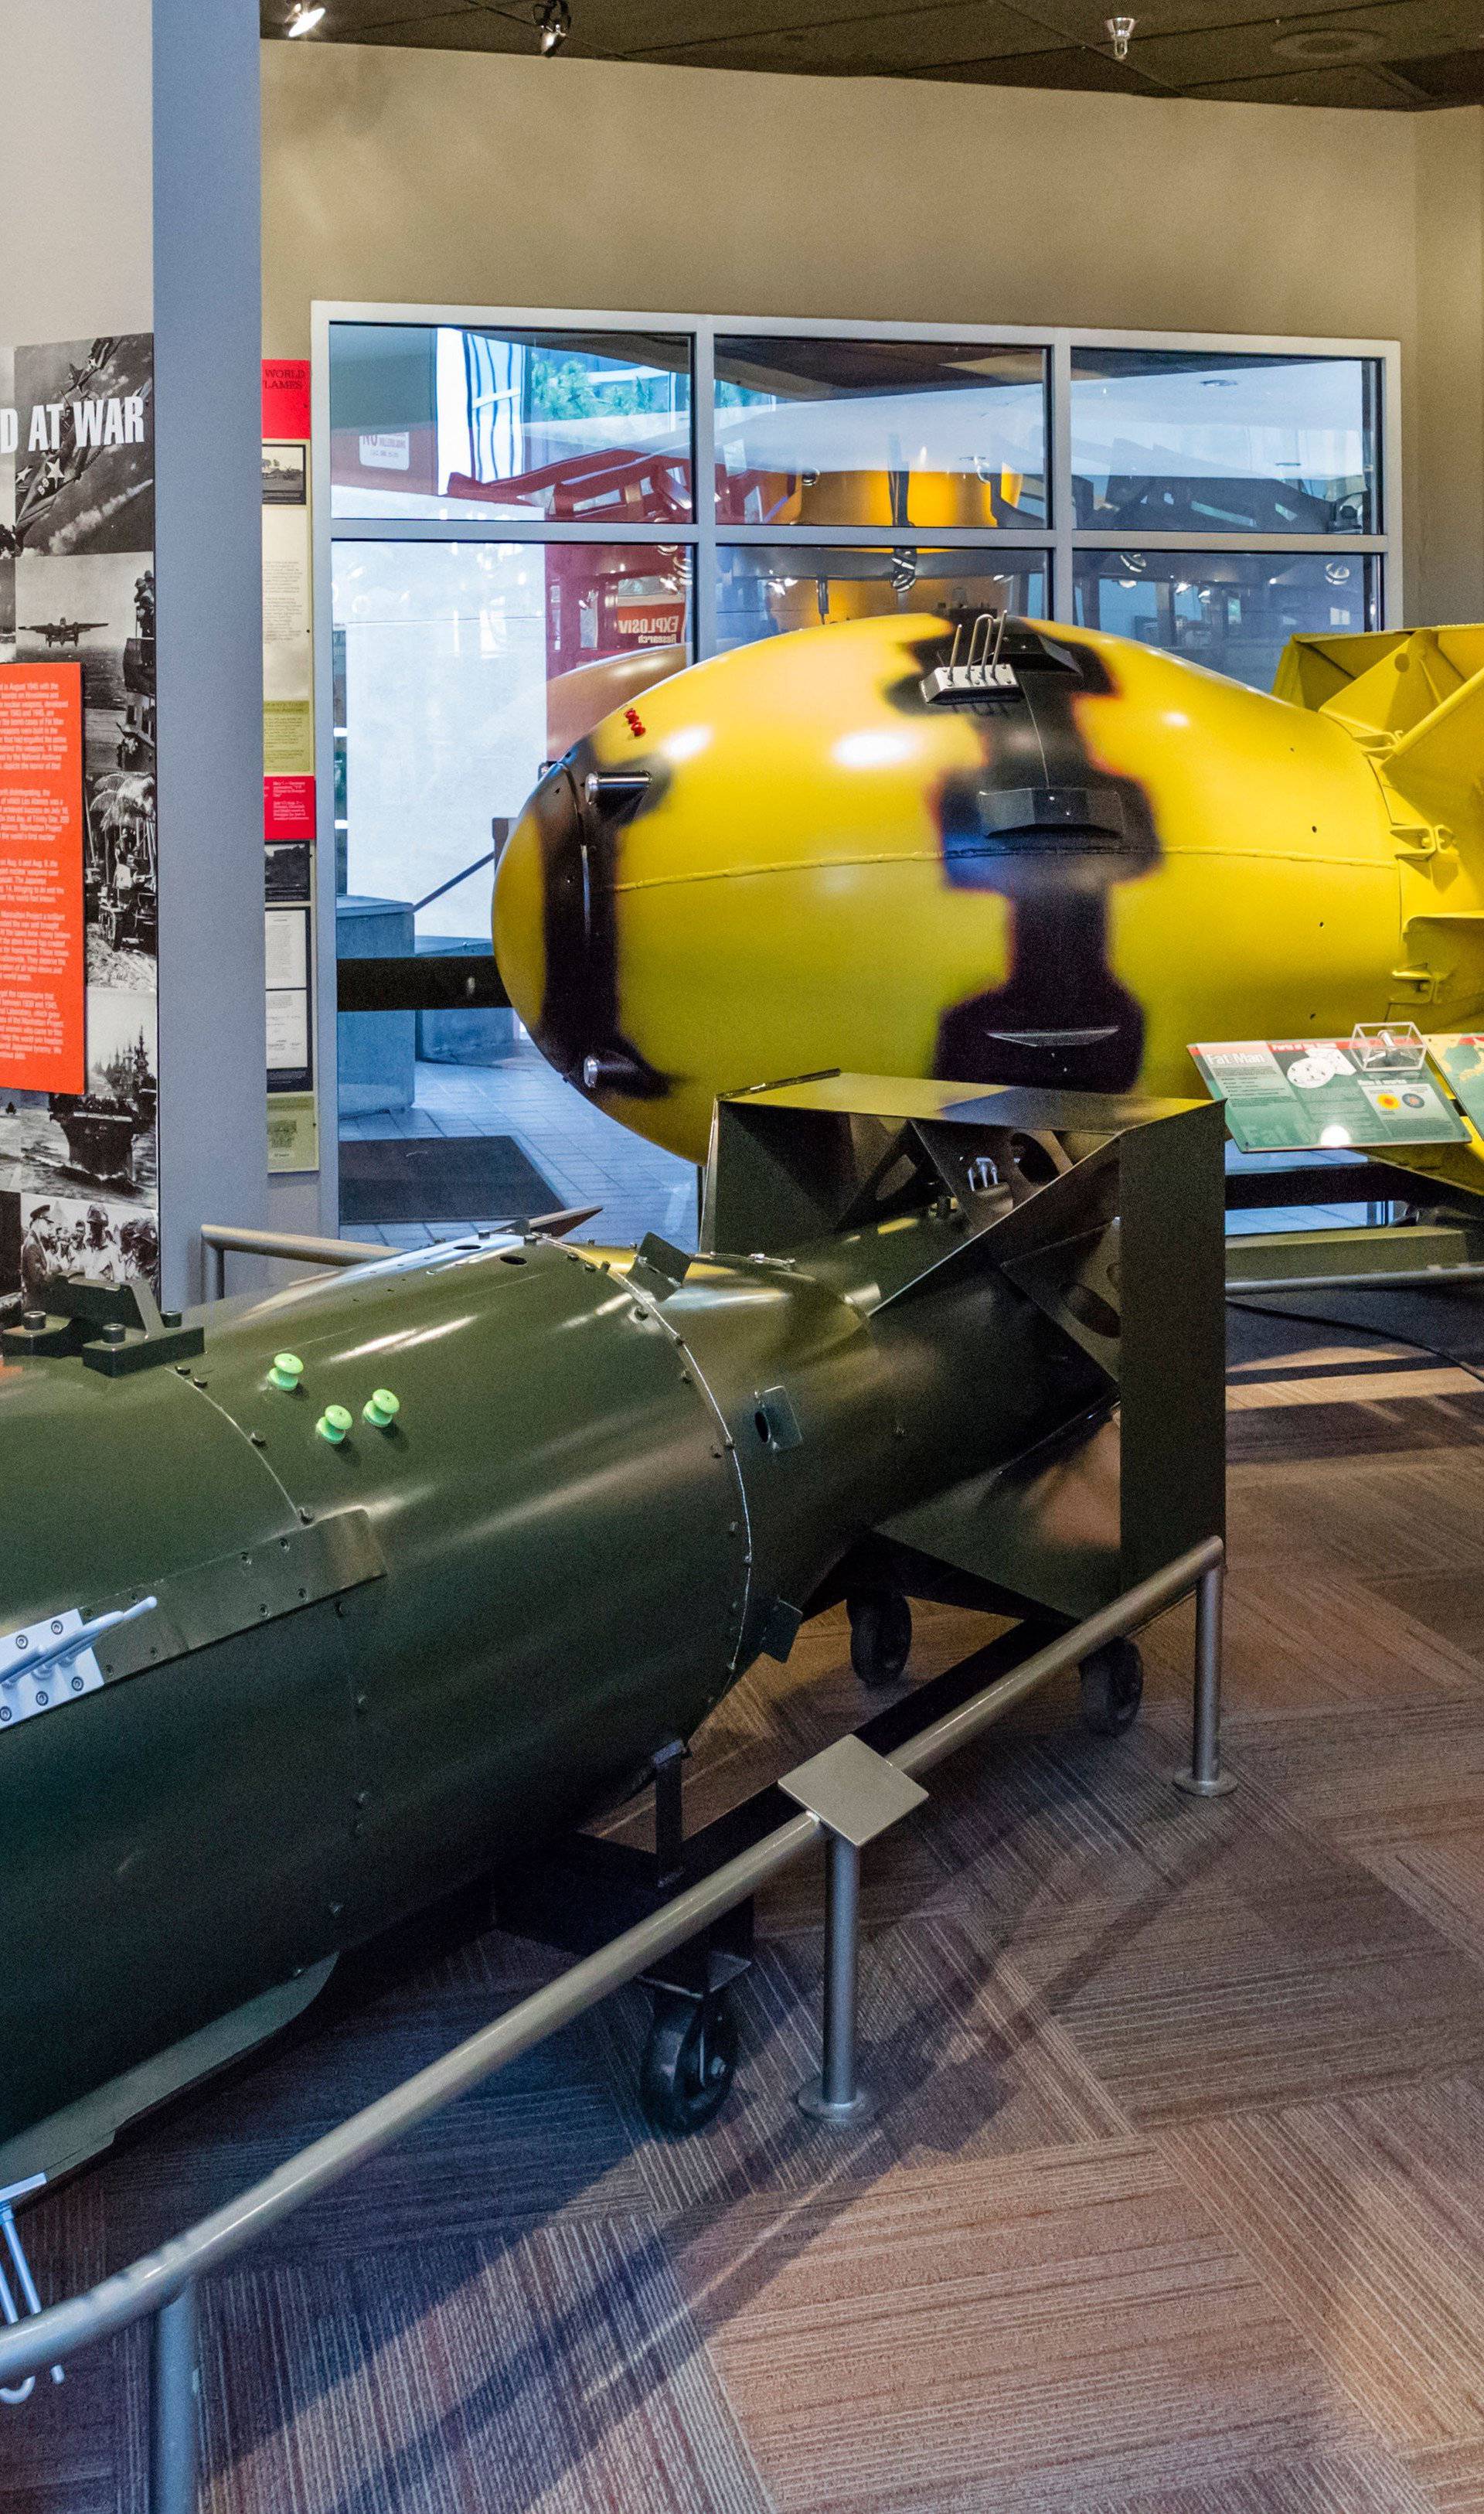 Models of atomic bombs "Little Boy" (foreground) and "Fat Man" (yellow), Bradbury Science Museum, Los Alamos, New Mexico, USA